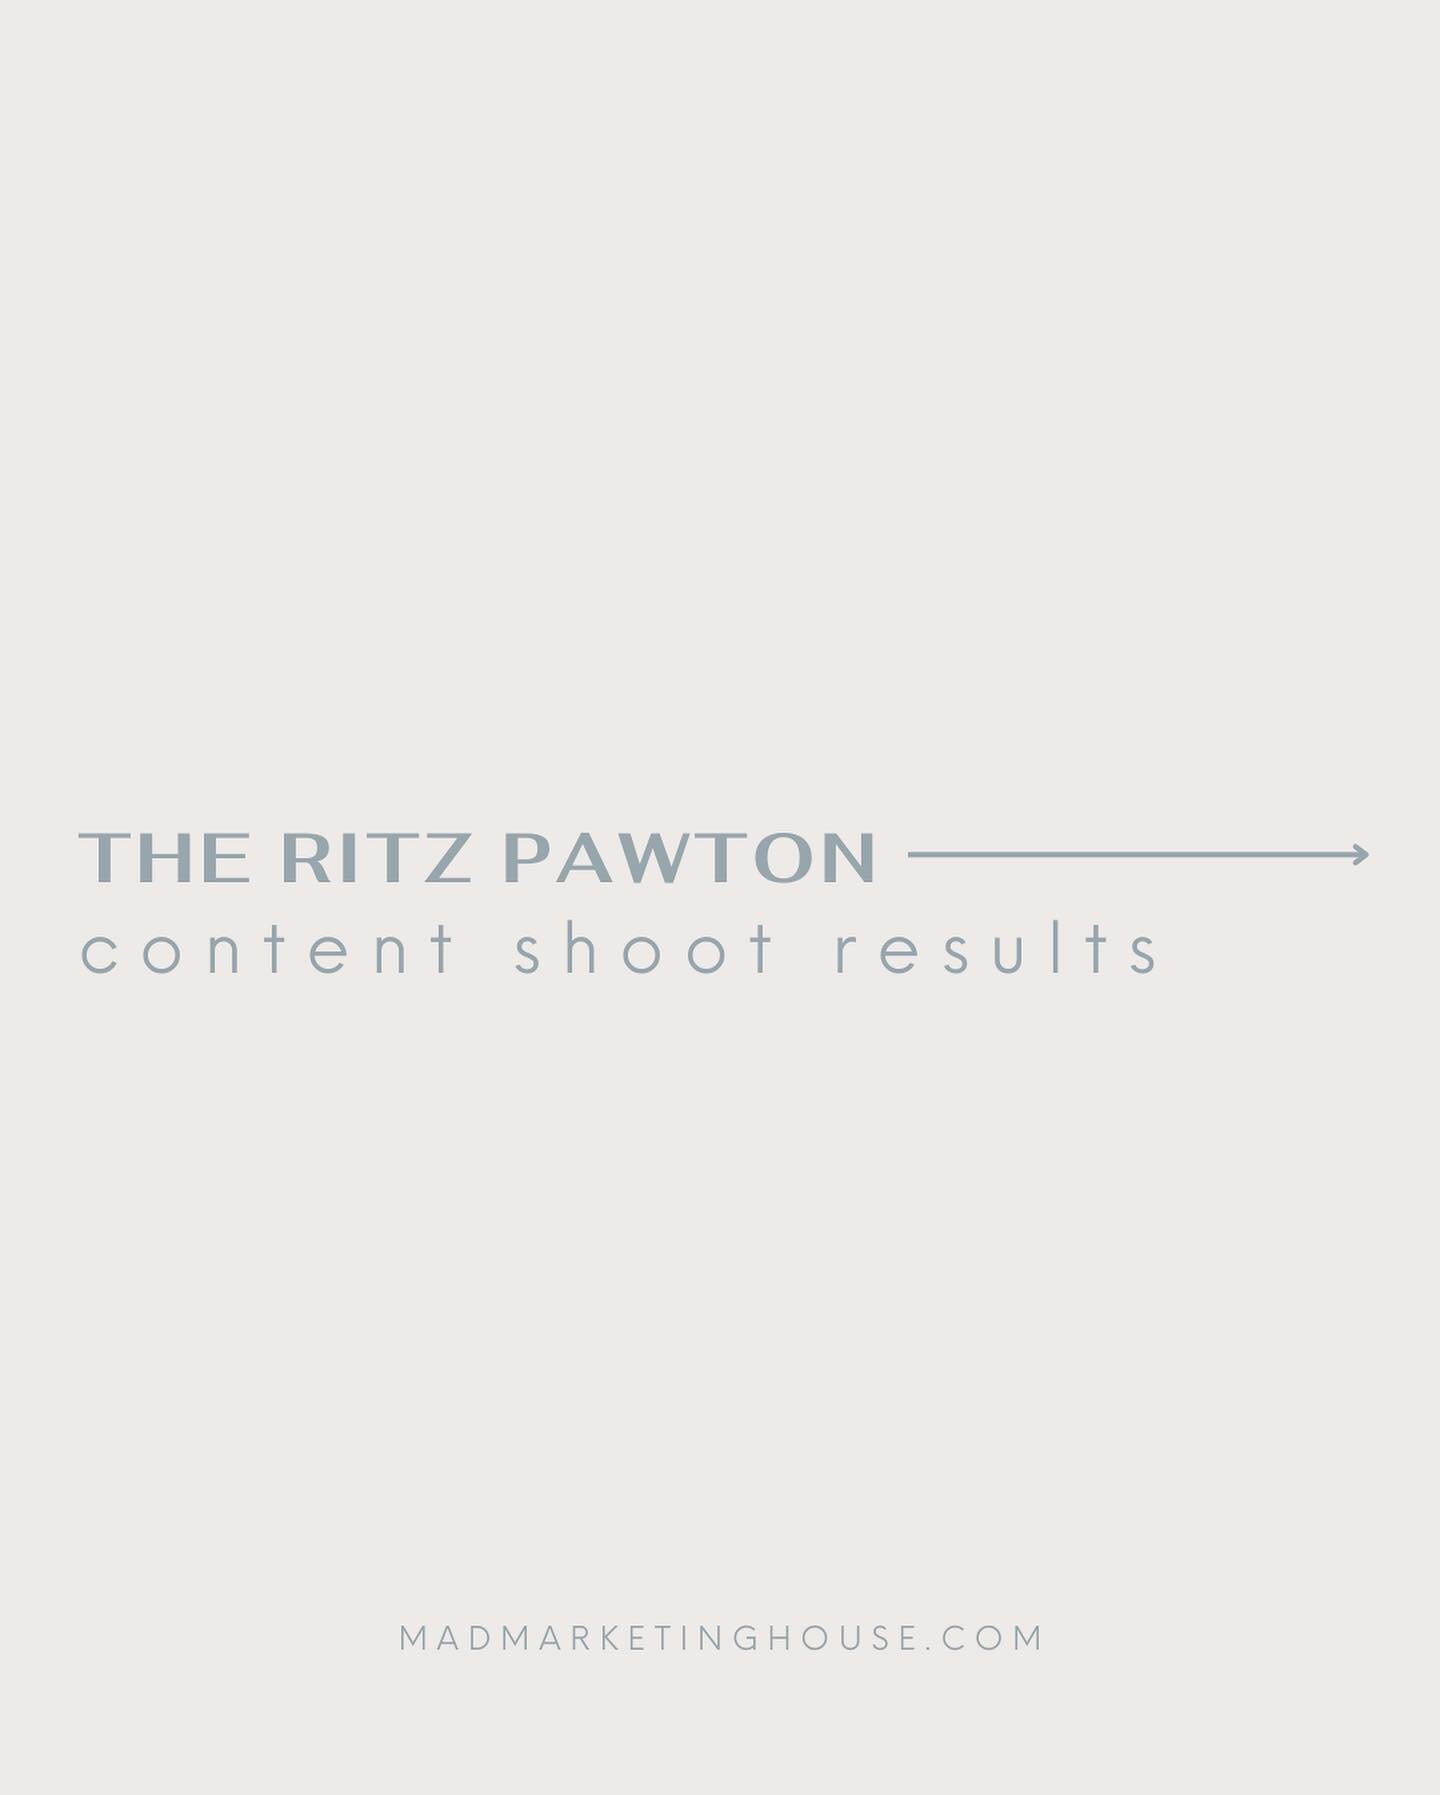 We had the best time with the pups @theritzpawton ✨

This client wanted to showcase the products, cleanliness, and luxurious feel of the doggy day spa. We are obsessed with these! Swipe for the results!

#madmarketing #digitalmarketing #theritzpawto